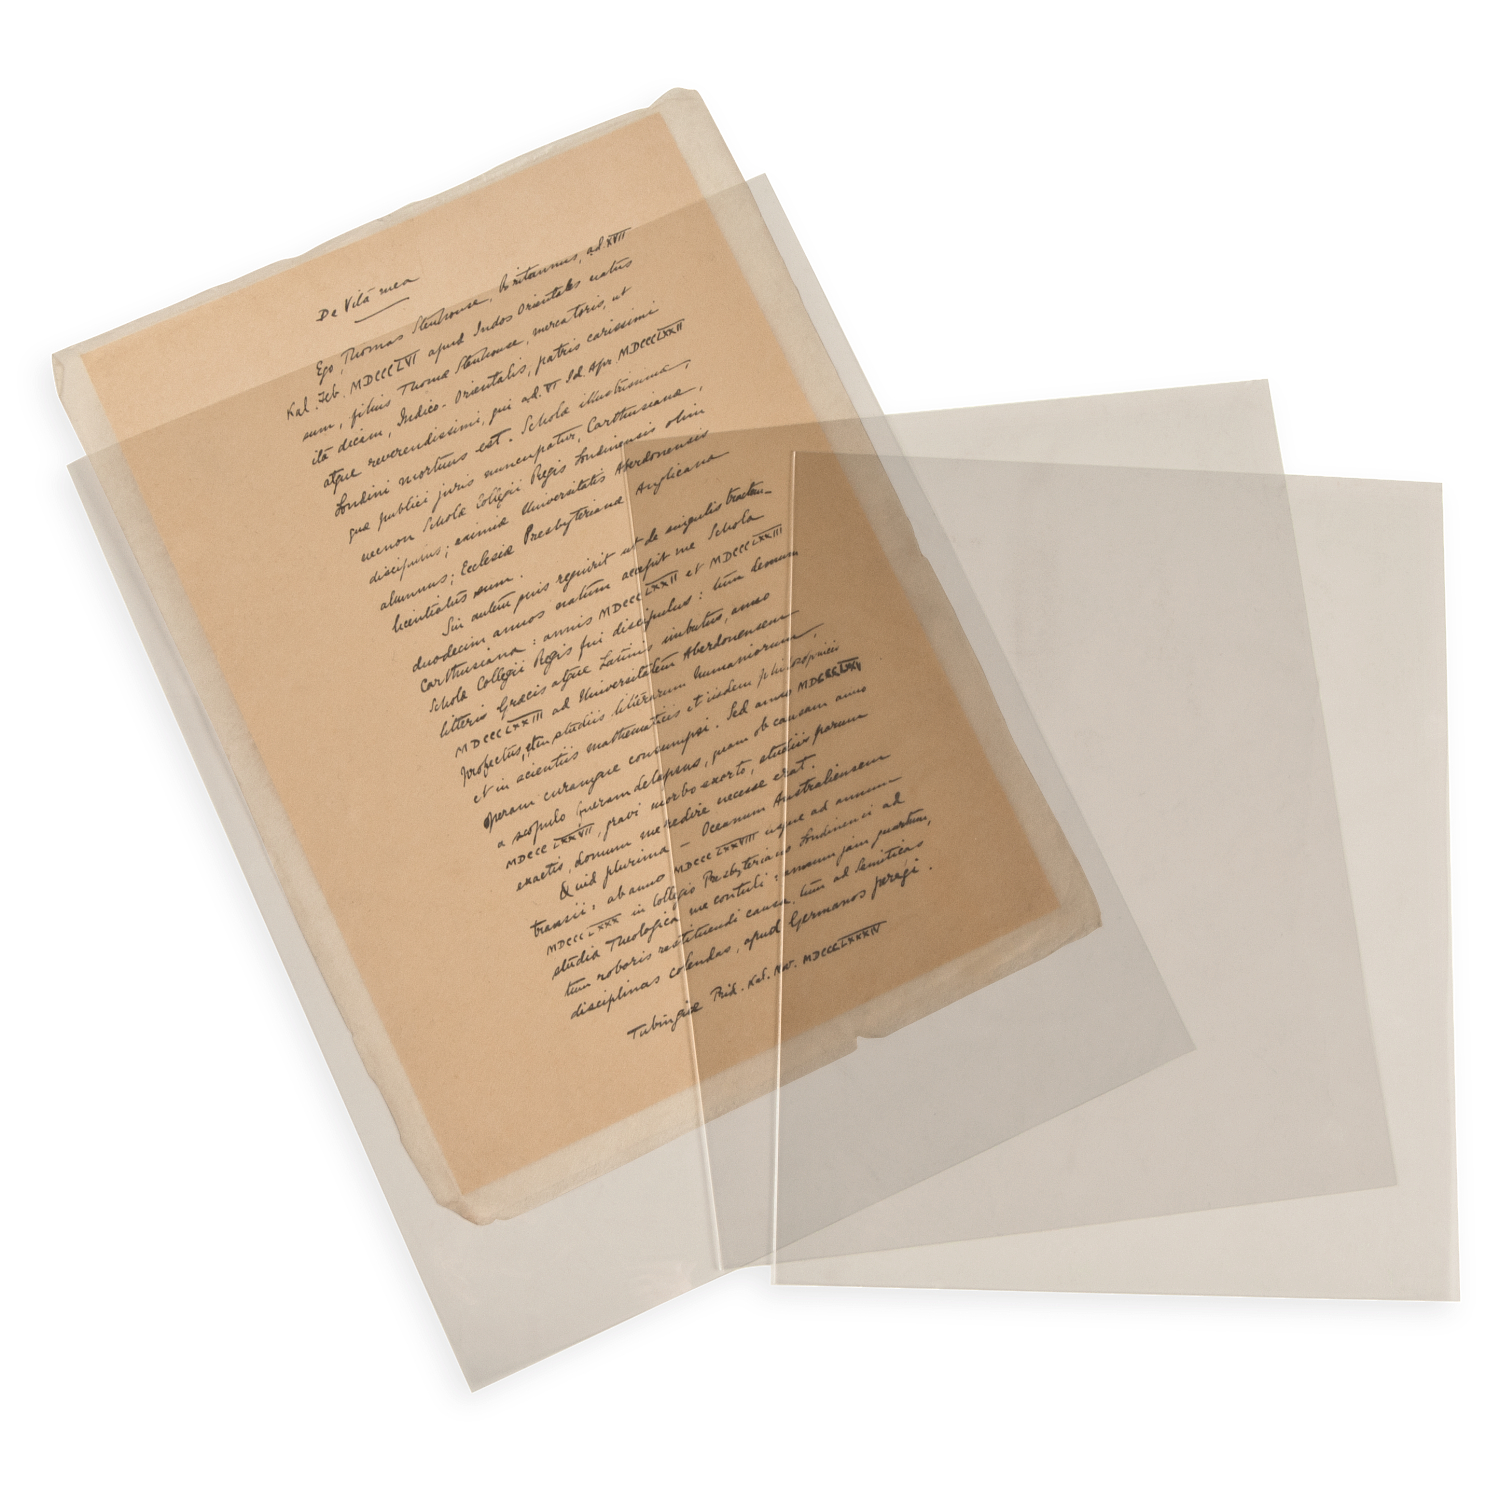 Gaylord Archival® Family Archives Kit, Kits, Document Preservation, Preservation